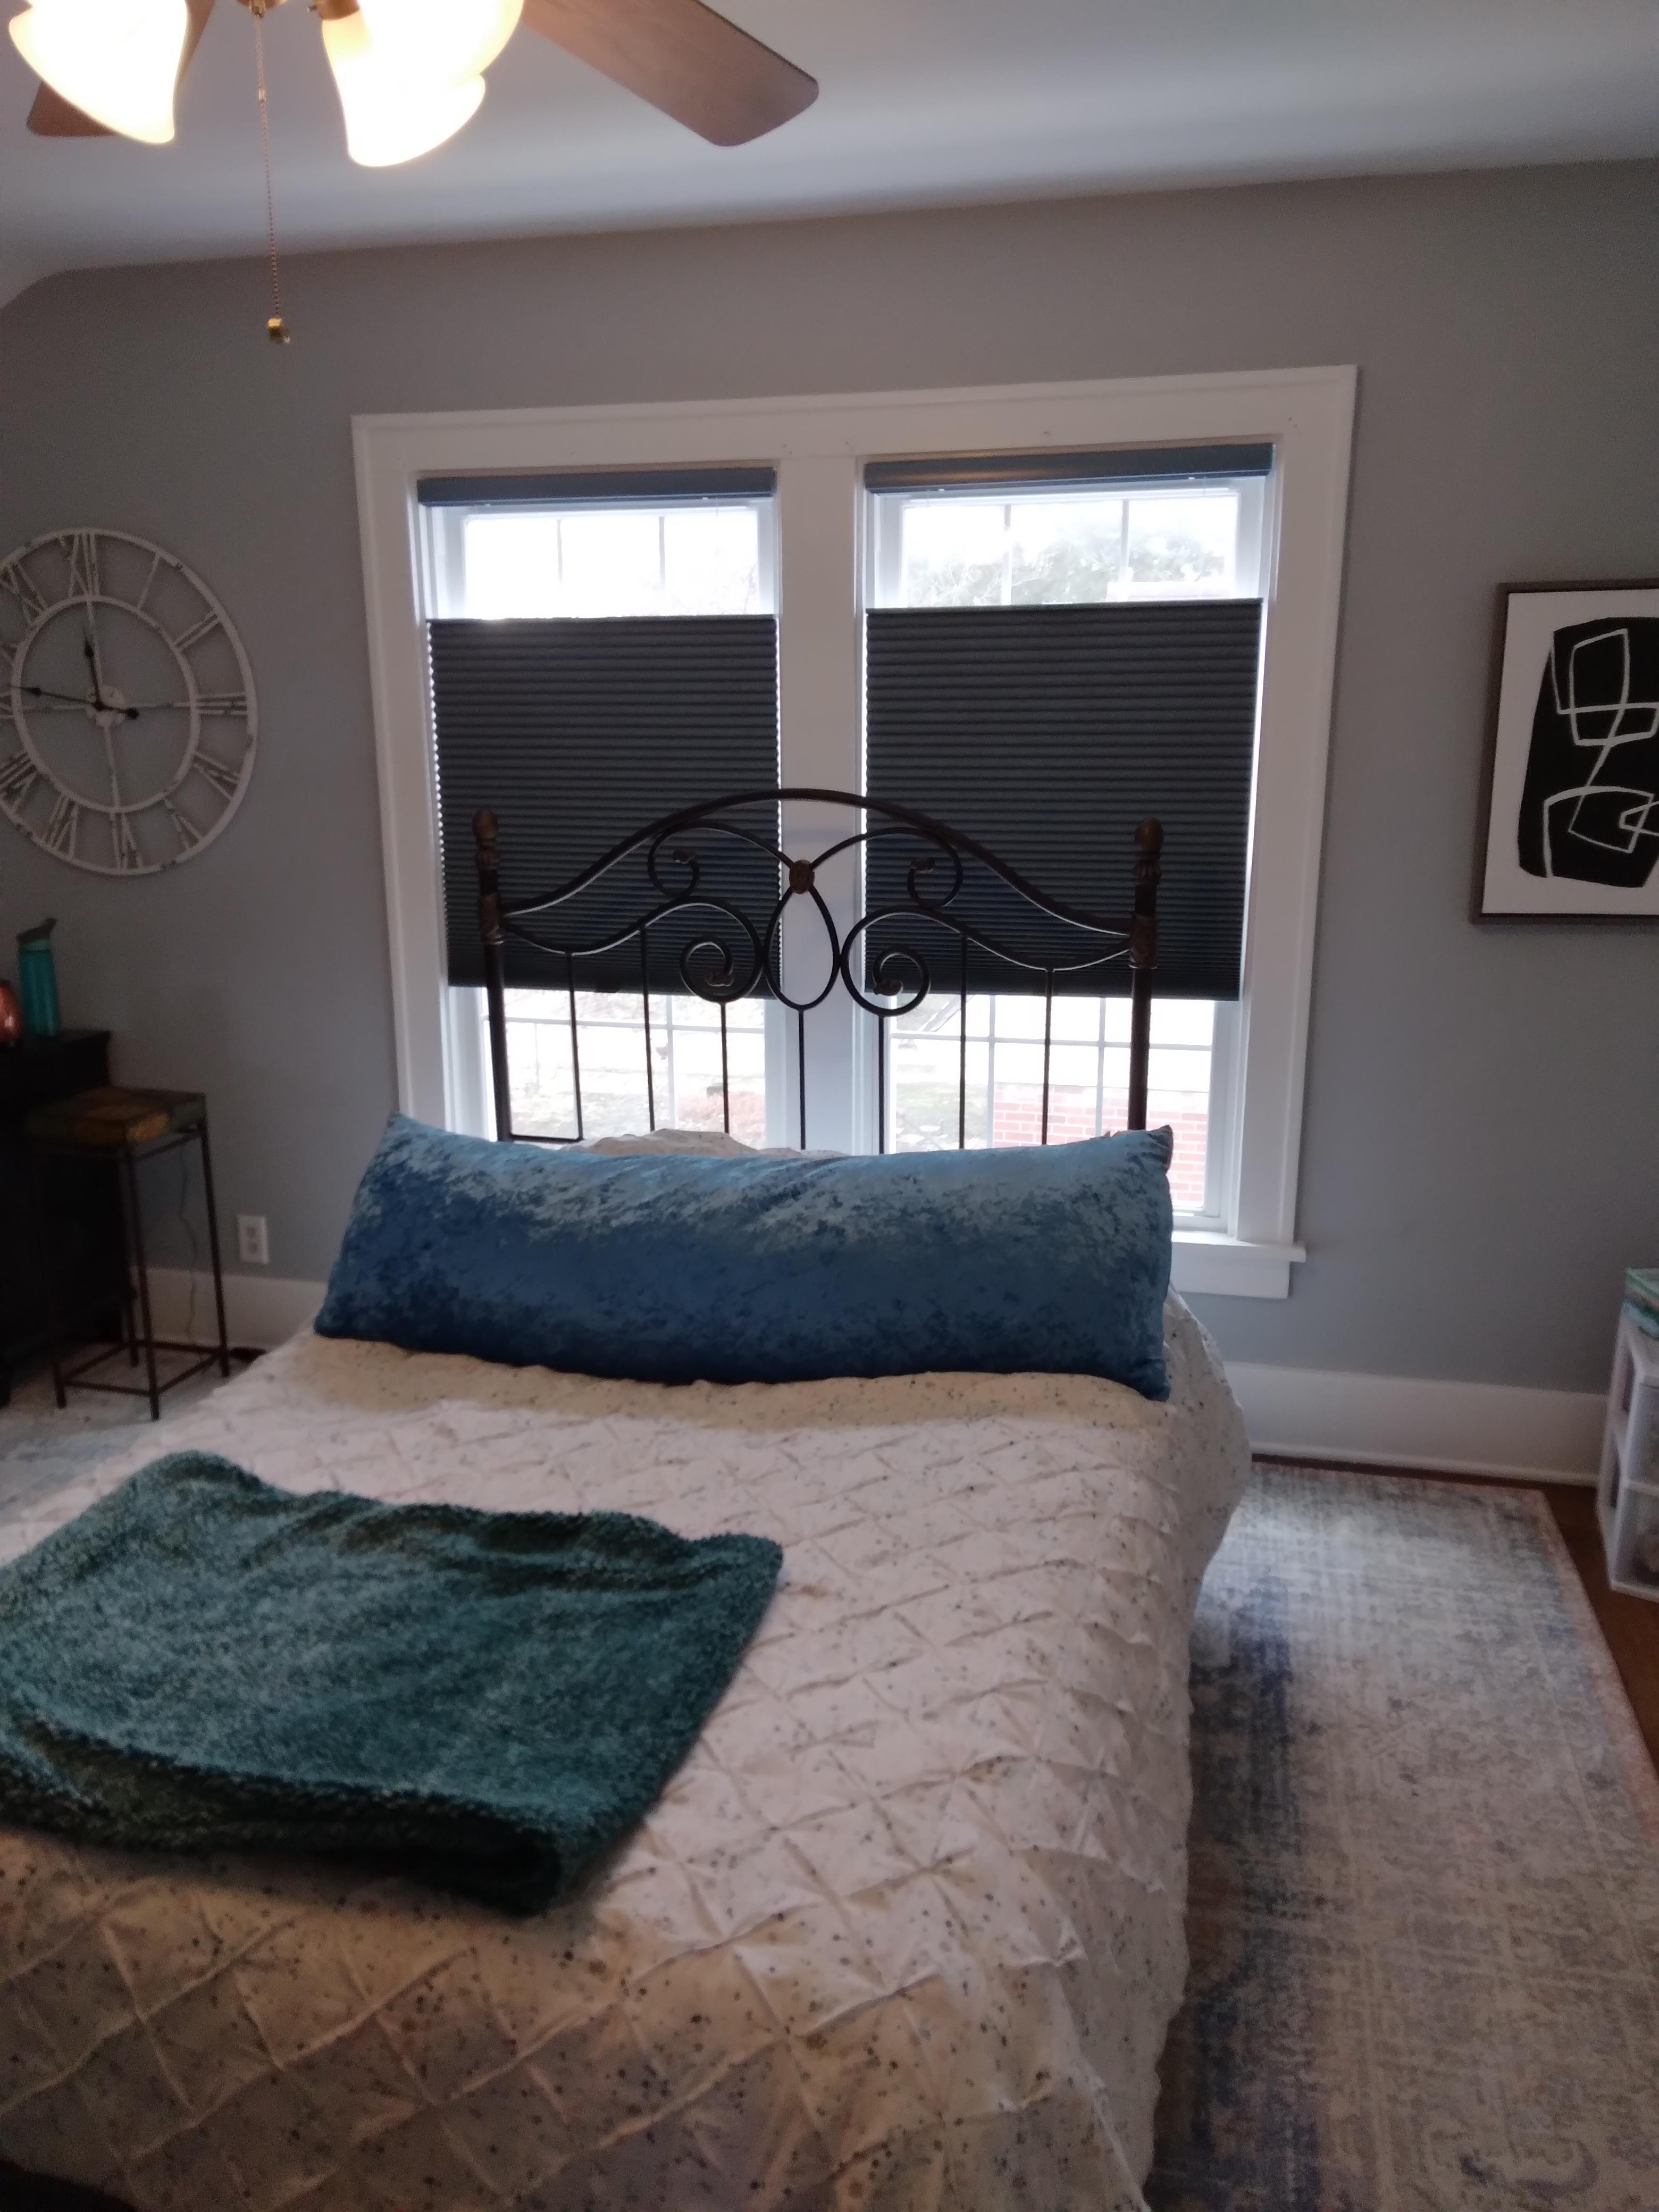 These blue cellular shades complement the style and colors in this Springfield Illinois bedroom. Top-down-bottom-up cellular shades add extra versatility to the popular honeycomb shade.  BudgetBlinds  WindowCoverings  Shades  HoneycombShades  CellularShades  SpringfieldIllinois